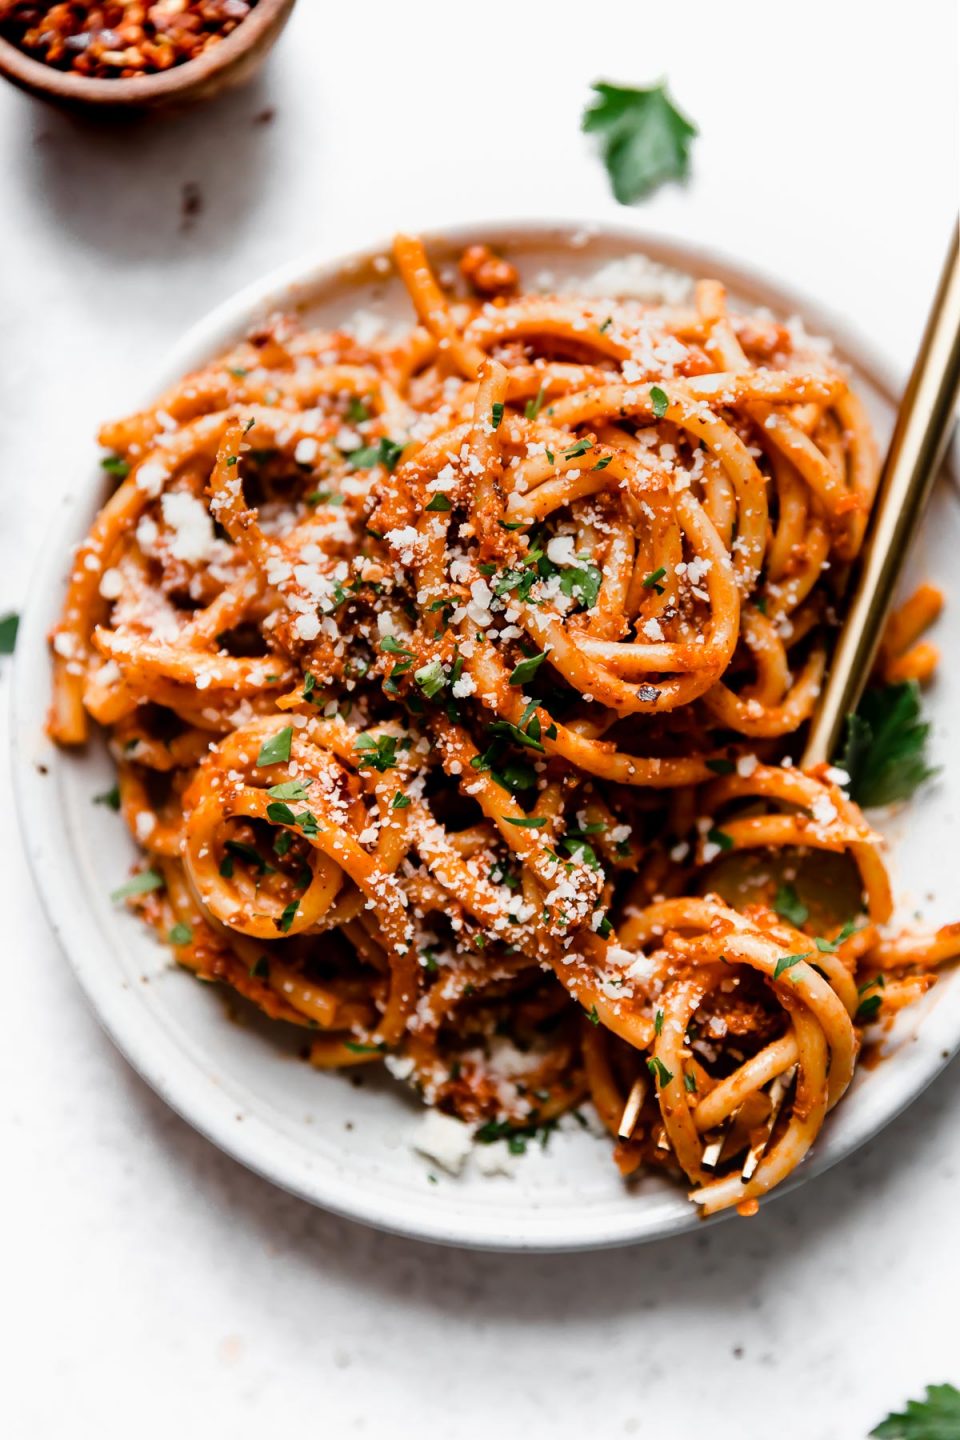 Bolognese sauce tossed into bucatini noodles, served on a small white plate with gold flatware. The pasta bolognese is topped with grated cheese, chopped parsley, & crushed red pepper flakes.